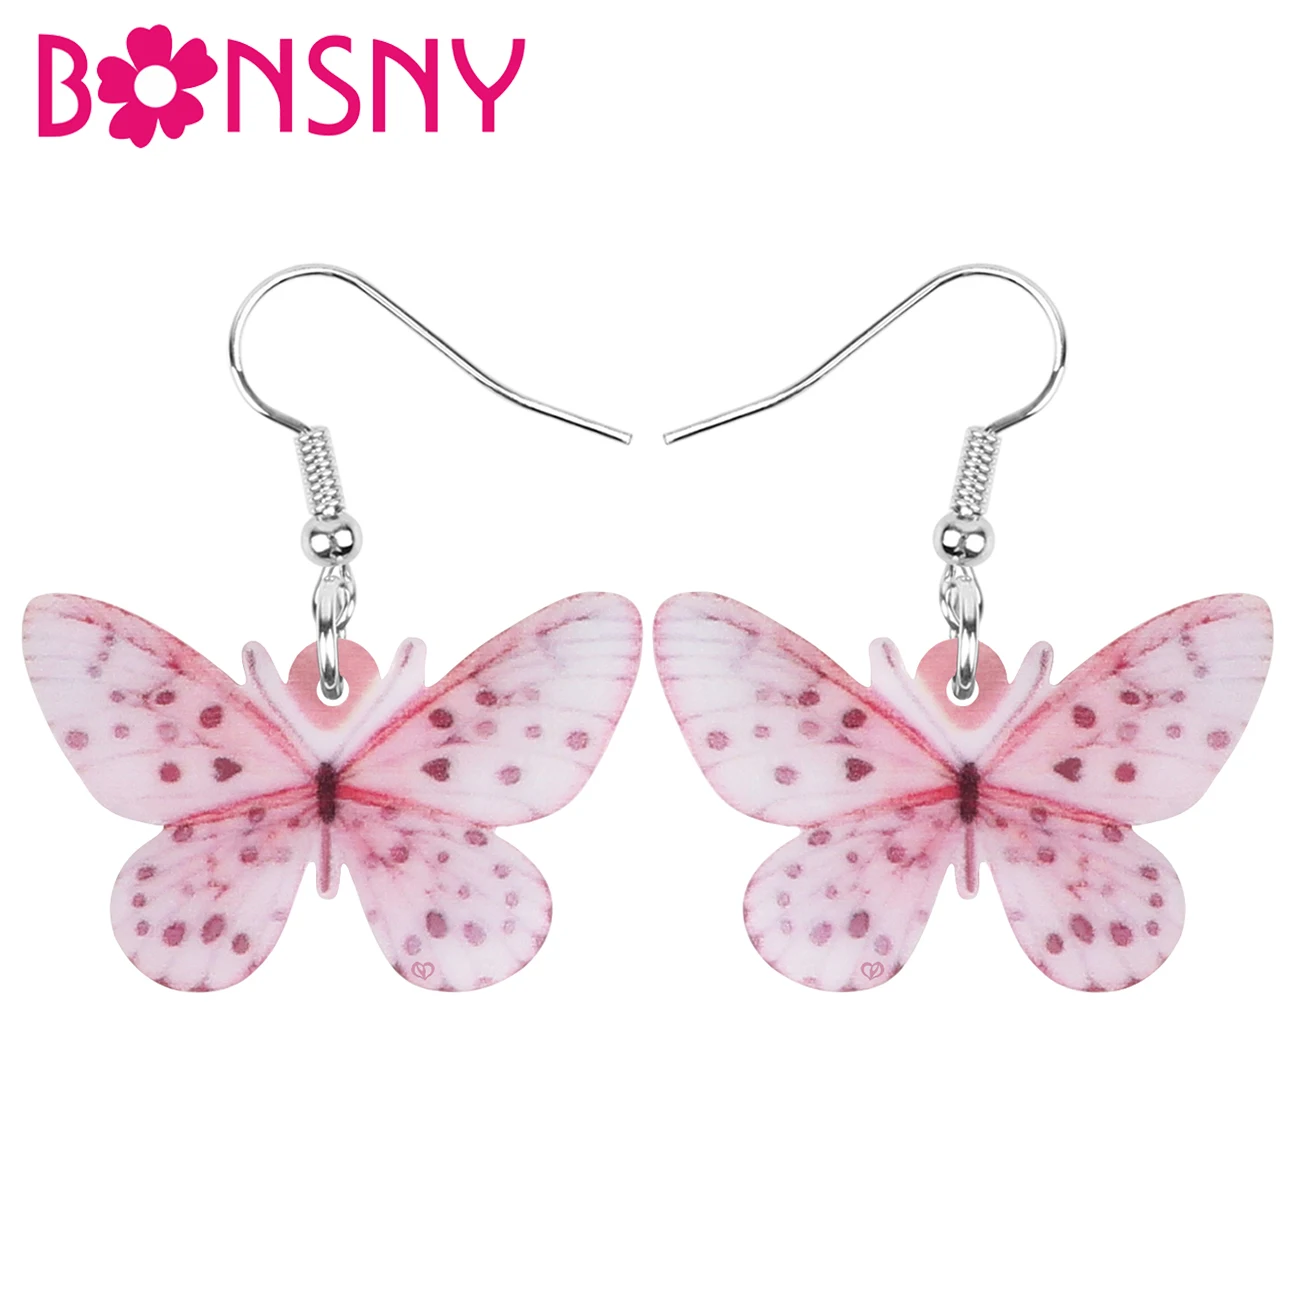 

Bonsny Acrylic Spot Pink Butterfly Earrings Funny Insect Animal Dangle Drop Jewelry For Women Kid Spring Fashion Gift Decoration